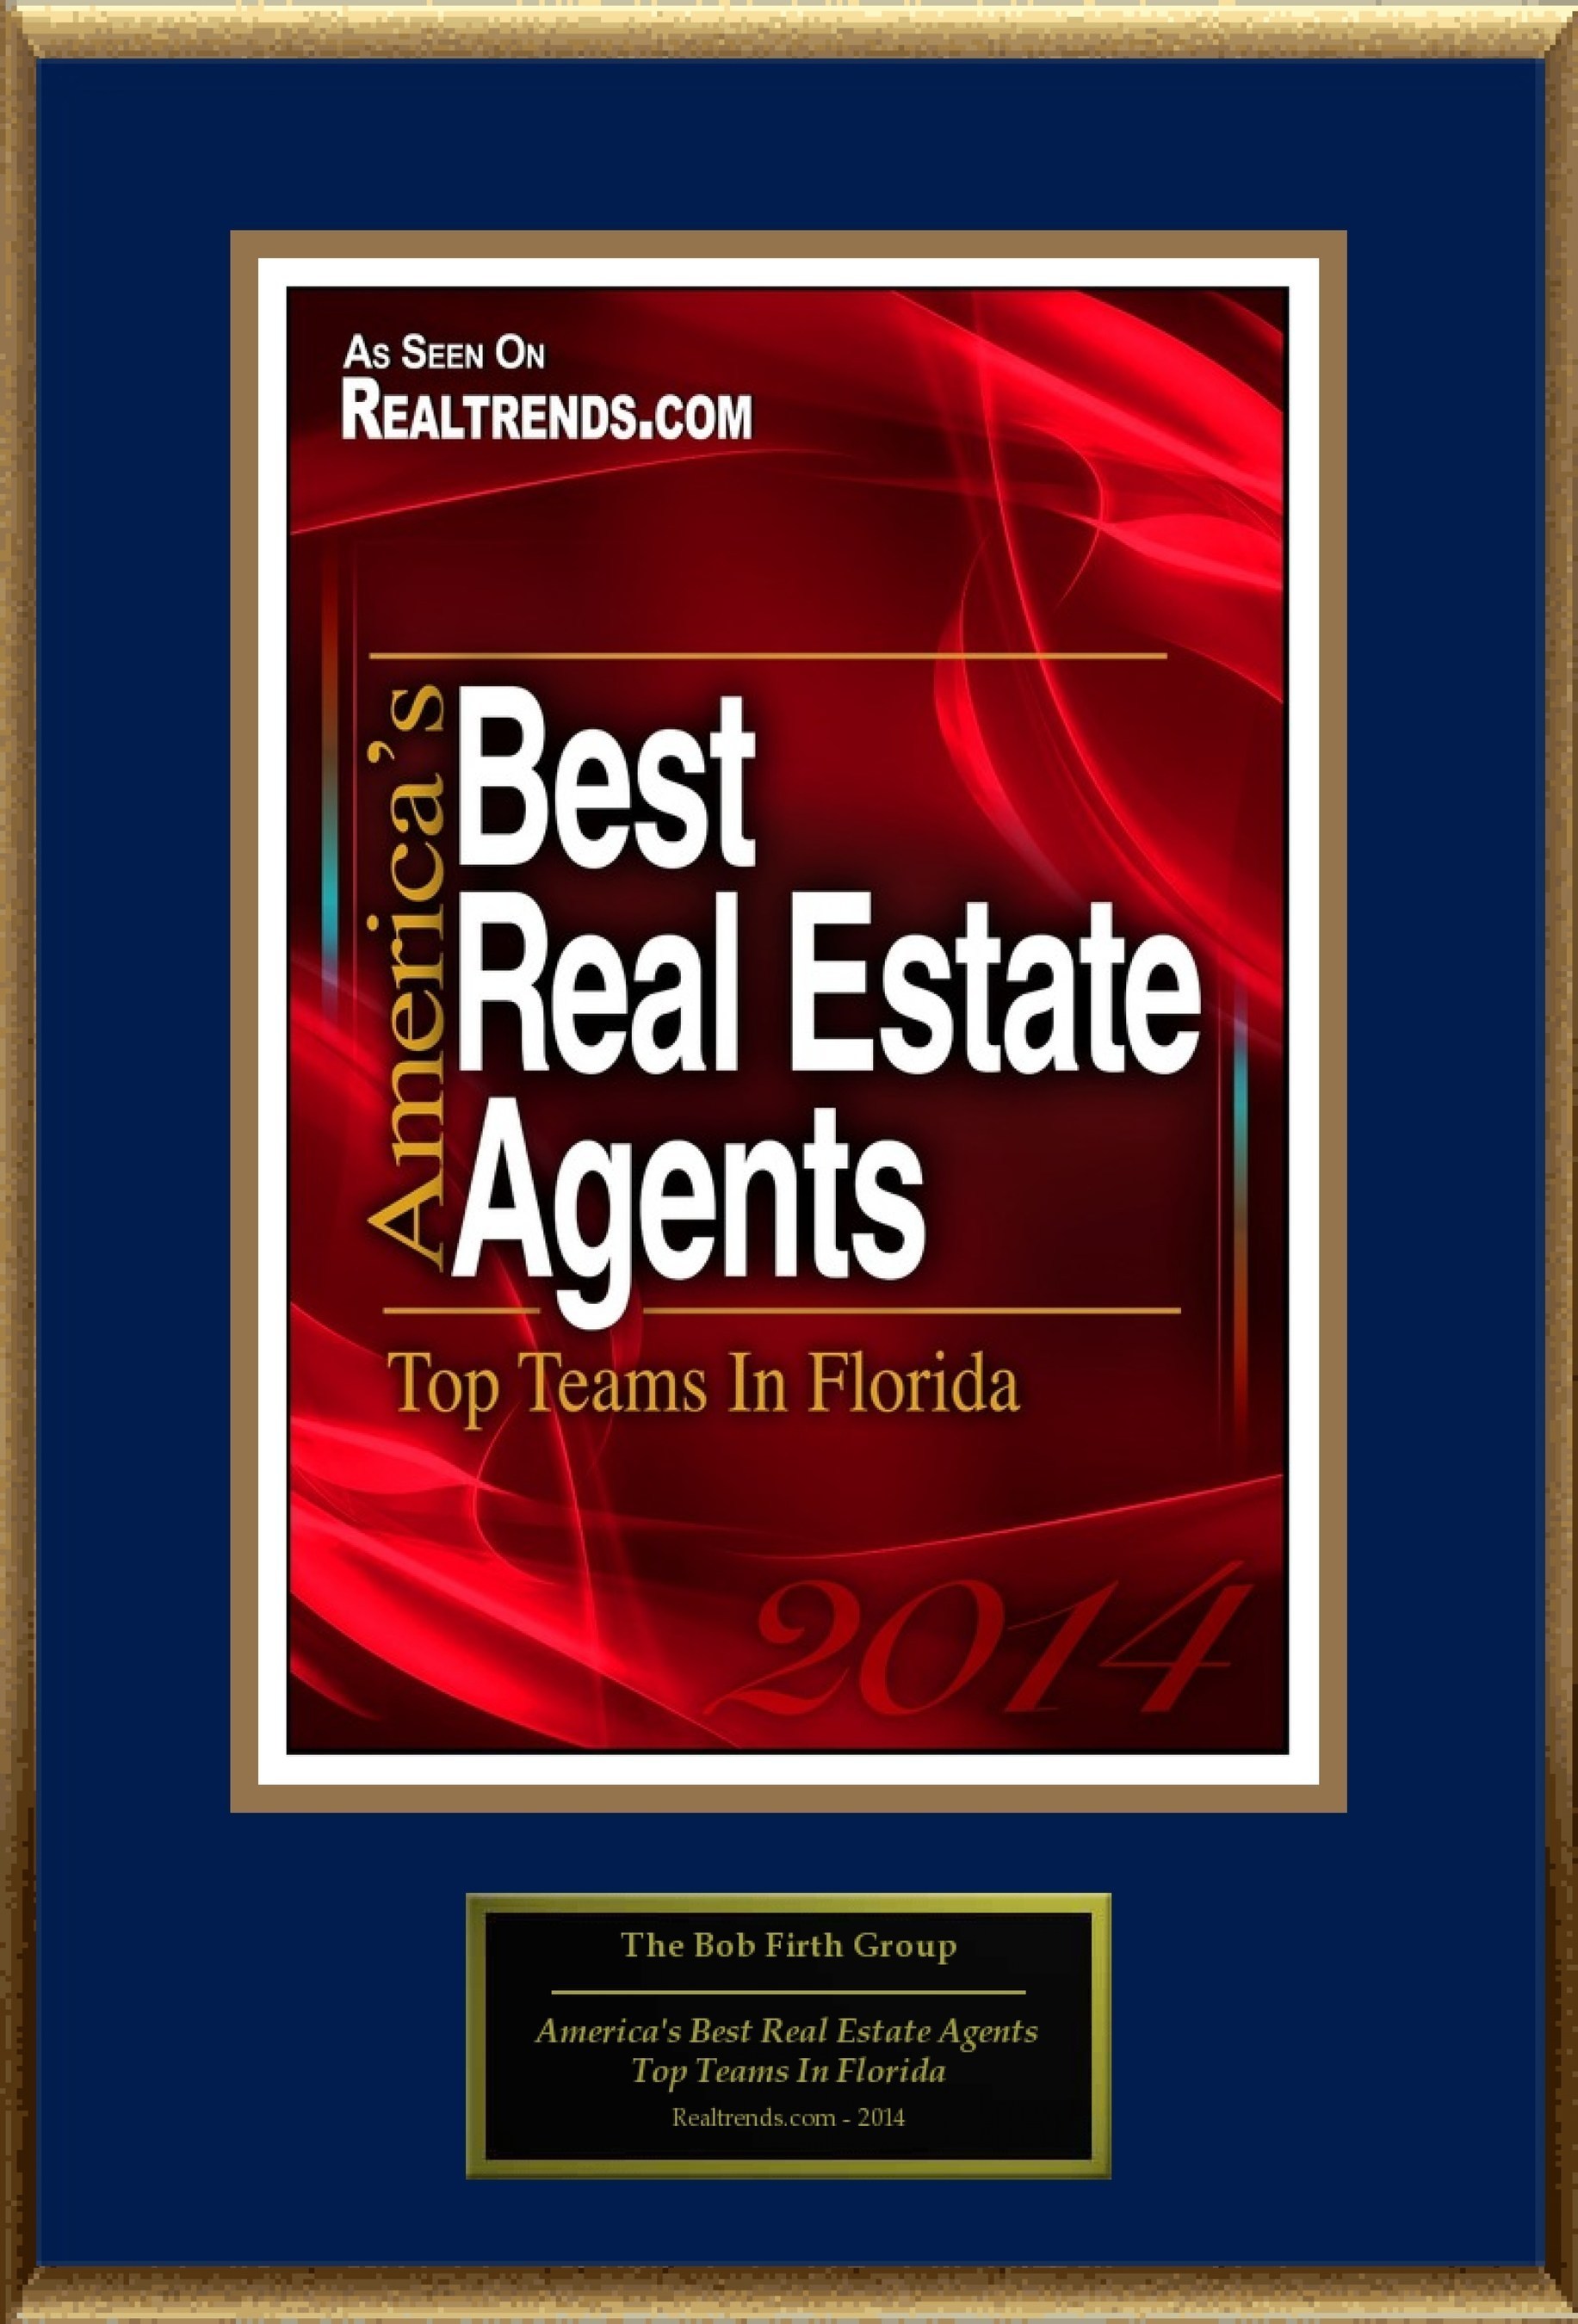 The Bob Firth Group Selected For "America's Best Real Estate Agents: Top Teams In Florida" (PRNewsFoto/America Registry)